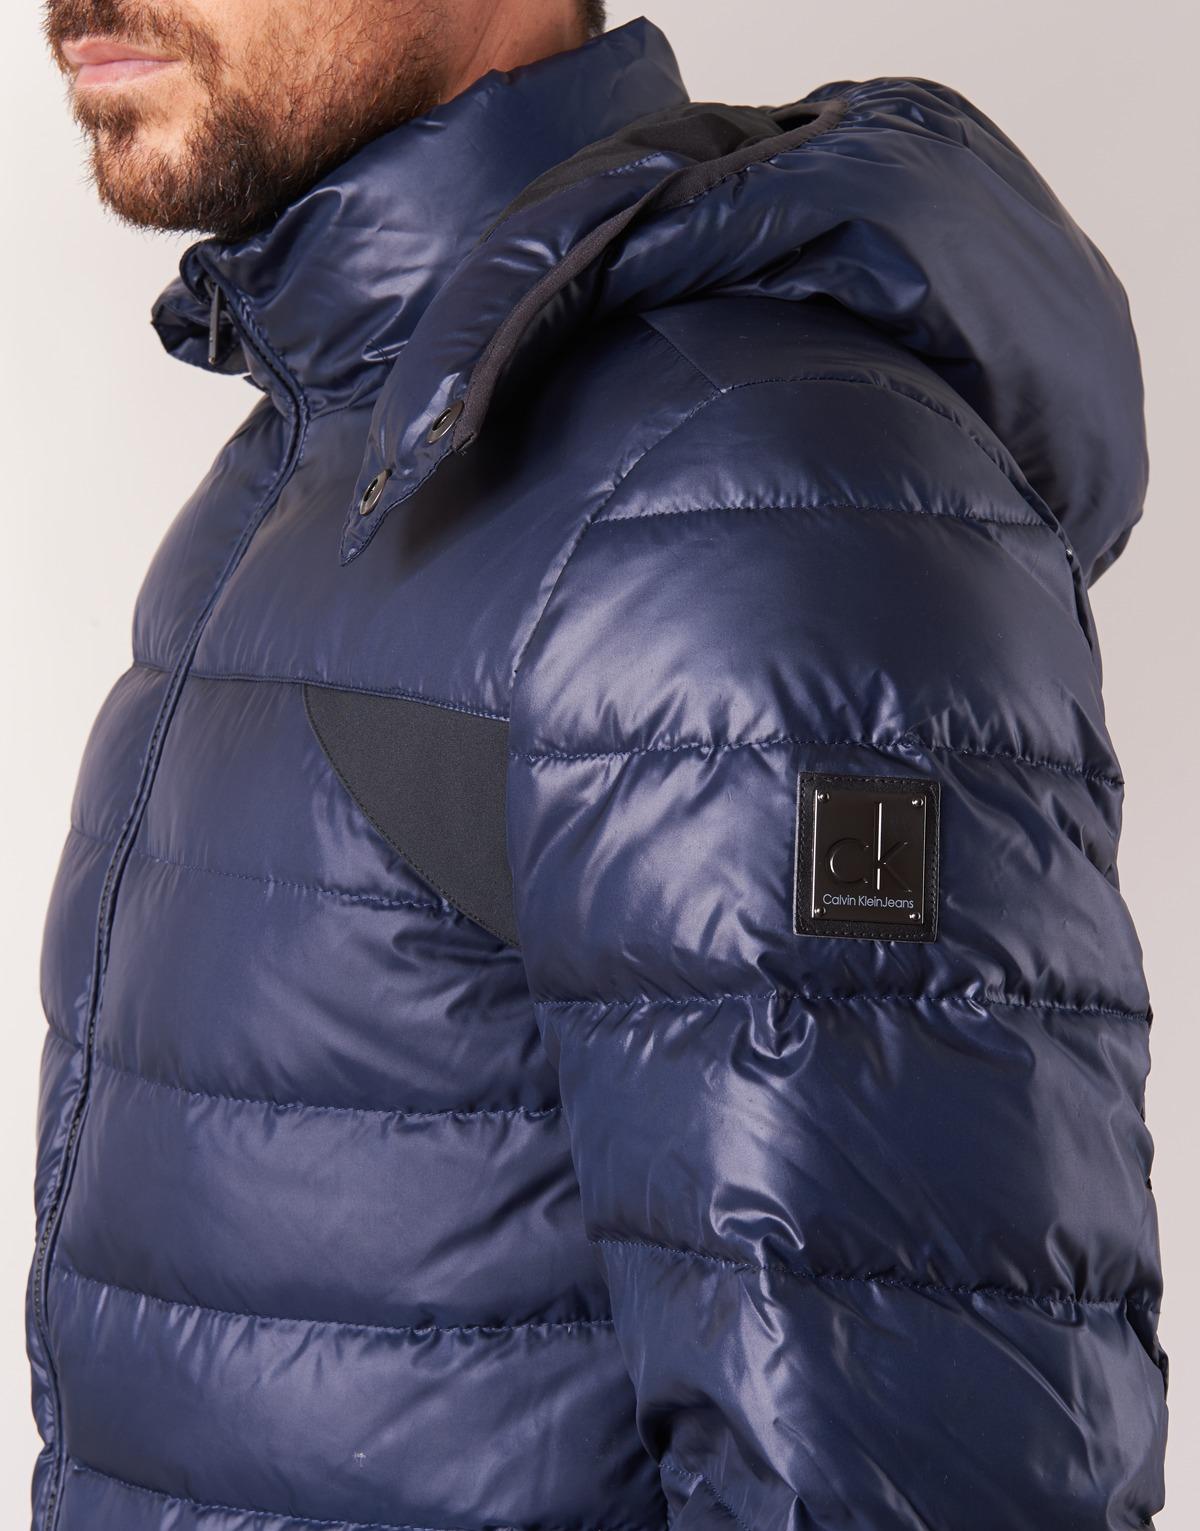 Calvin Klein Opron 2 Hd Down Jacket Online Hotsell, UP TO 70% OFF |  www.realliganaval.com